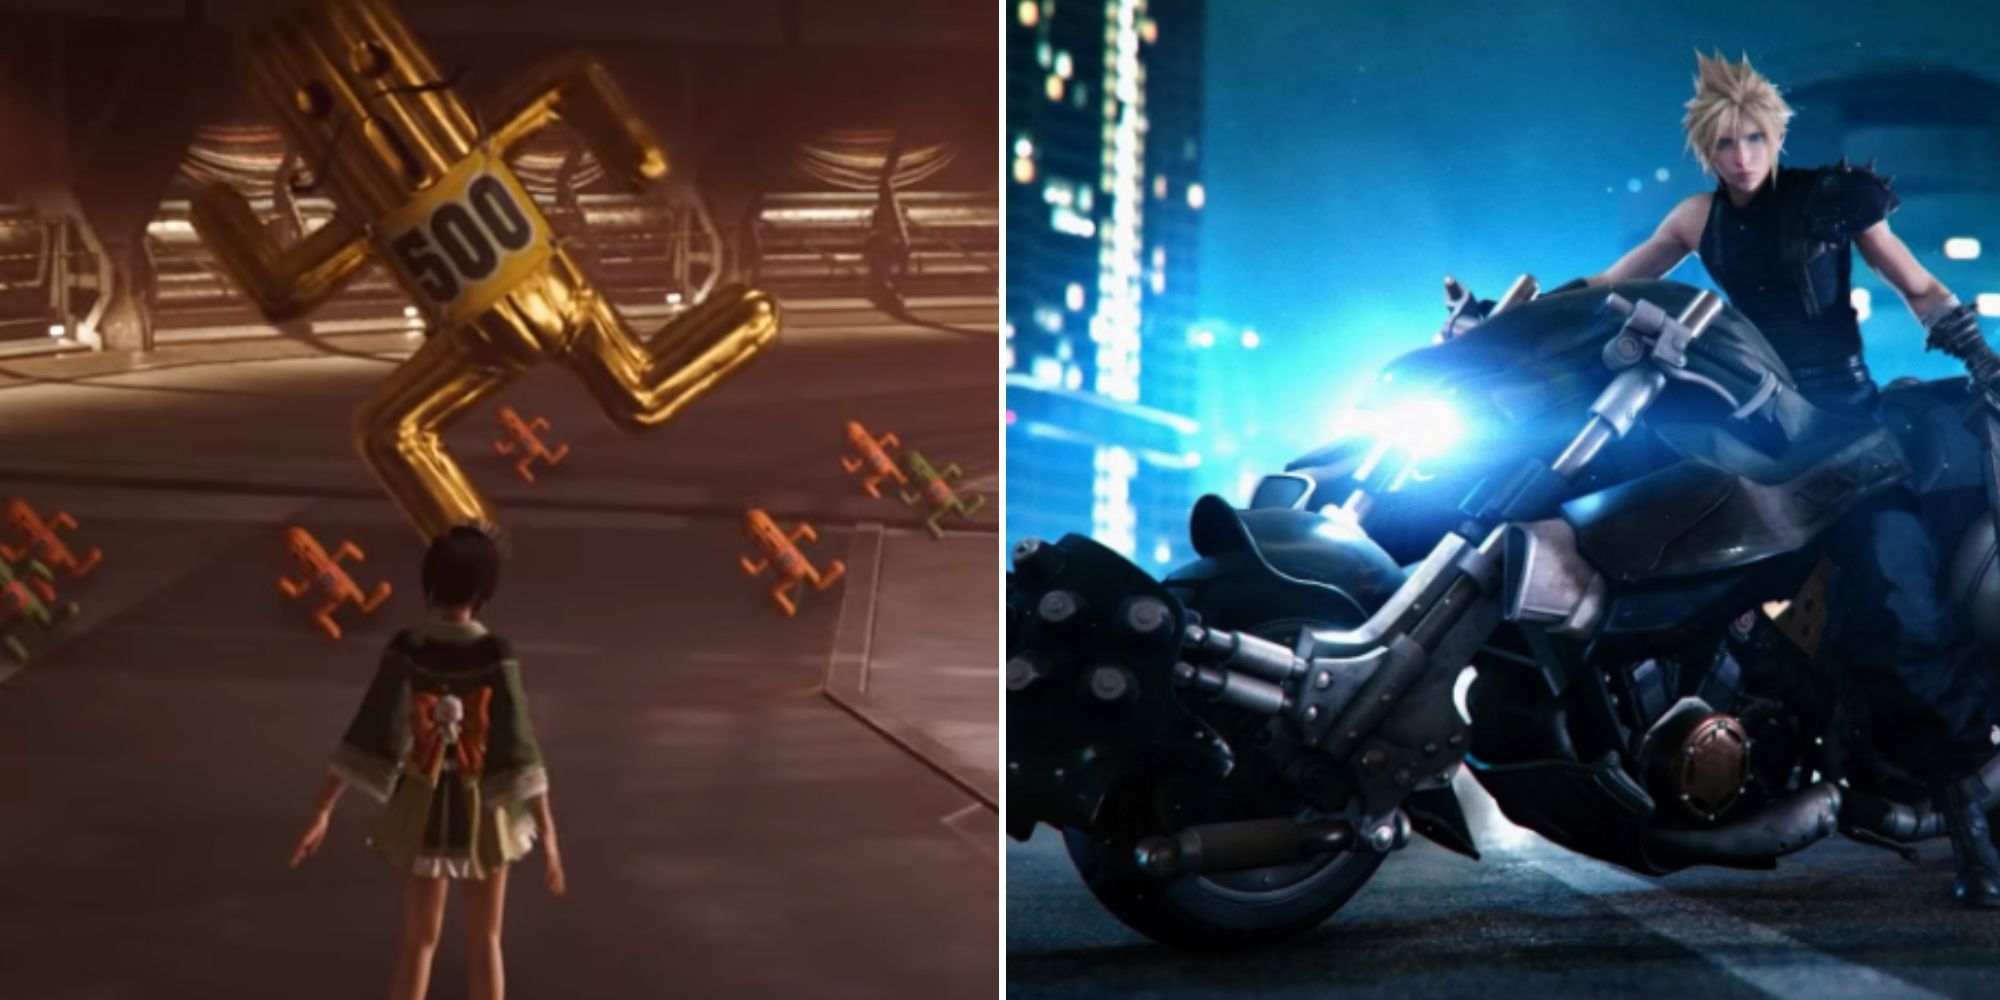 A split image showing Cloud on a motorcycle on the right and Yuffie confronting cactuars on the right